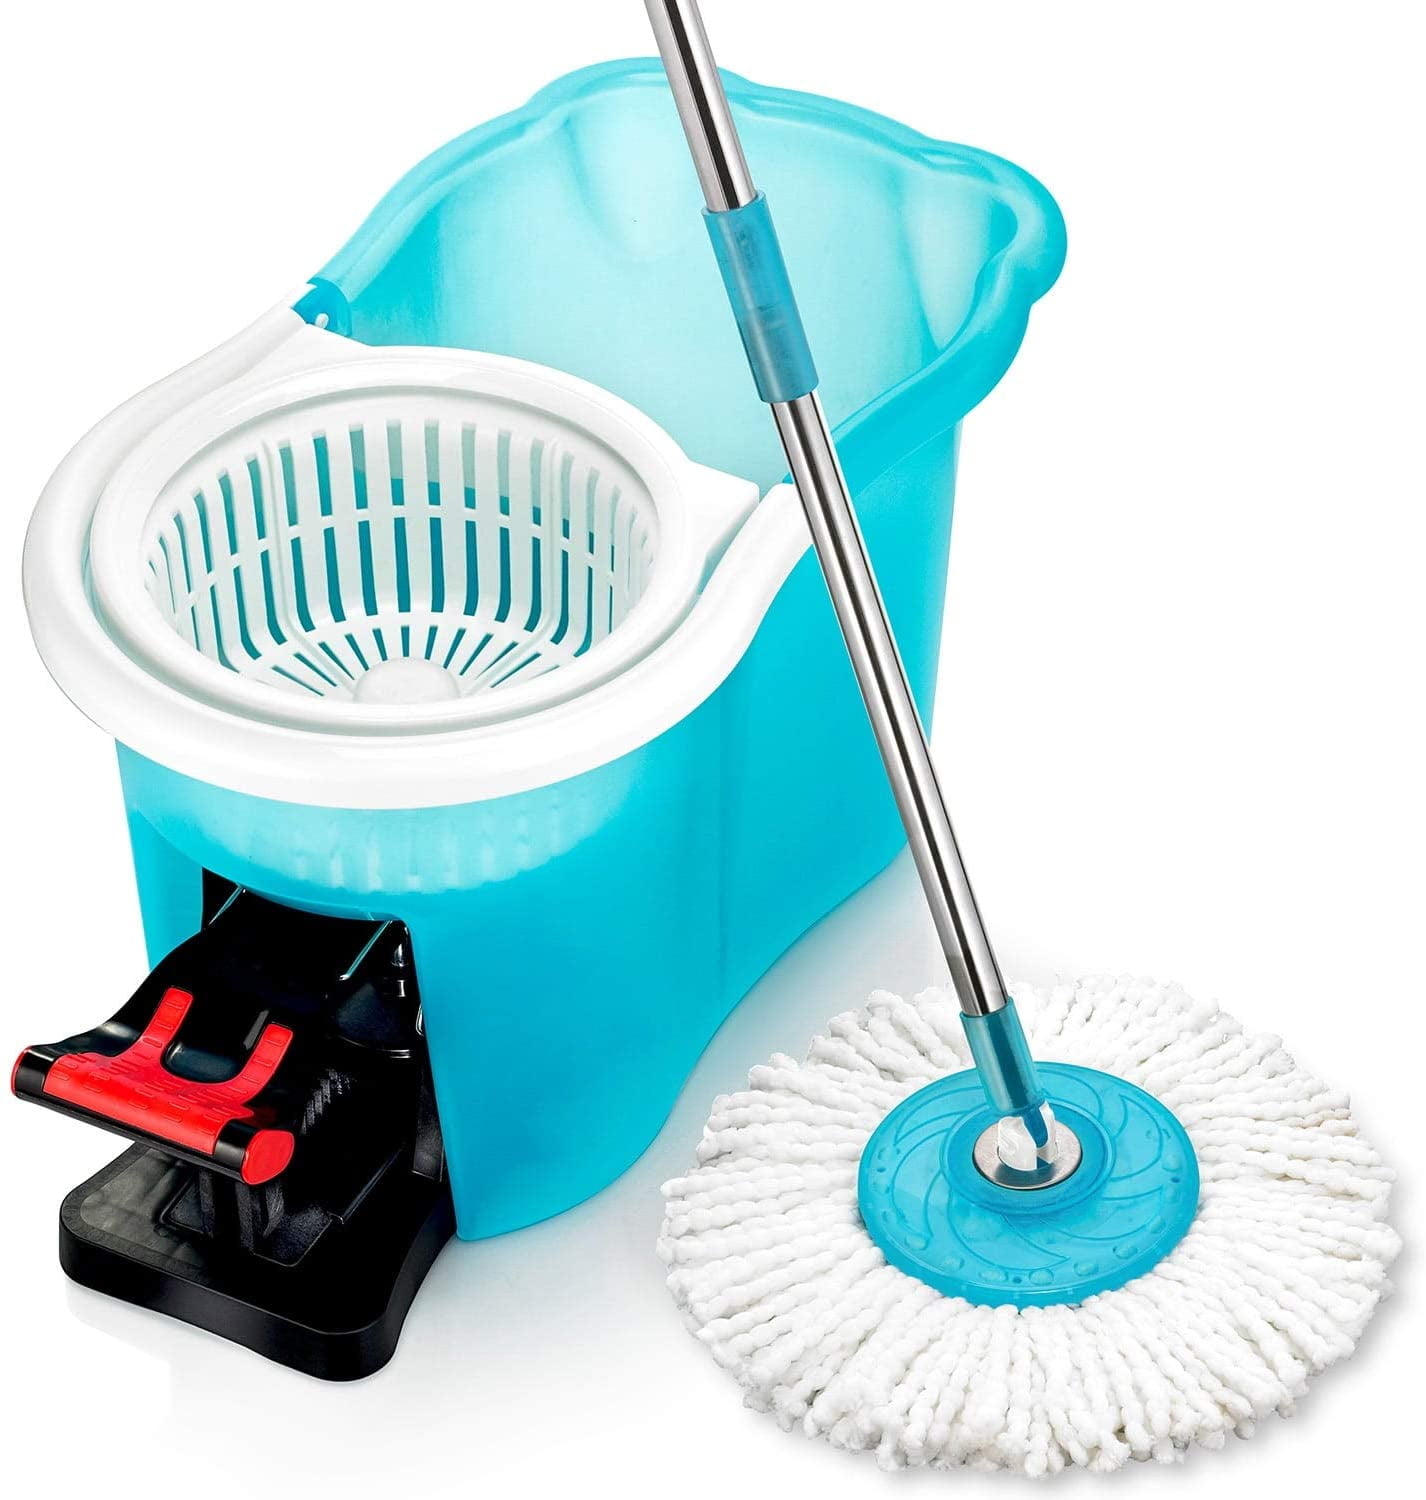 Hurricane Spin Mop Home Cleaning System by BulbHead, Floor Mop with